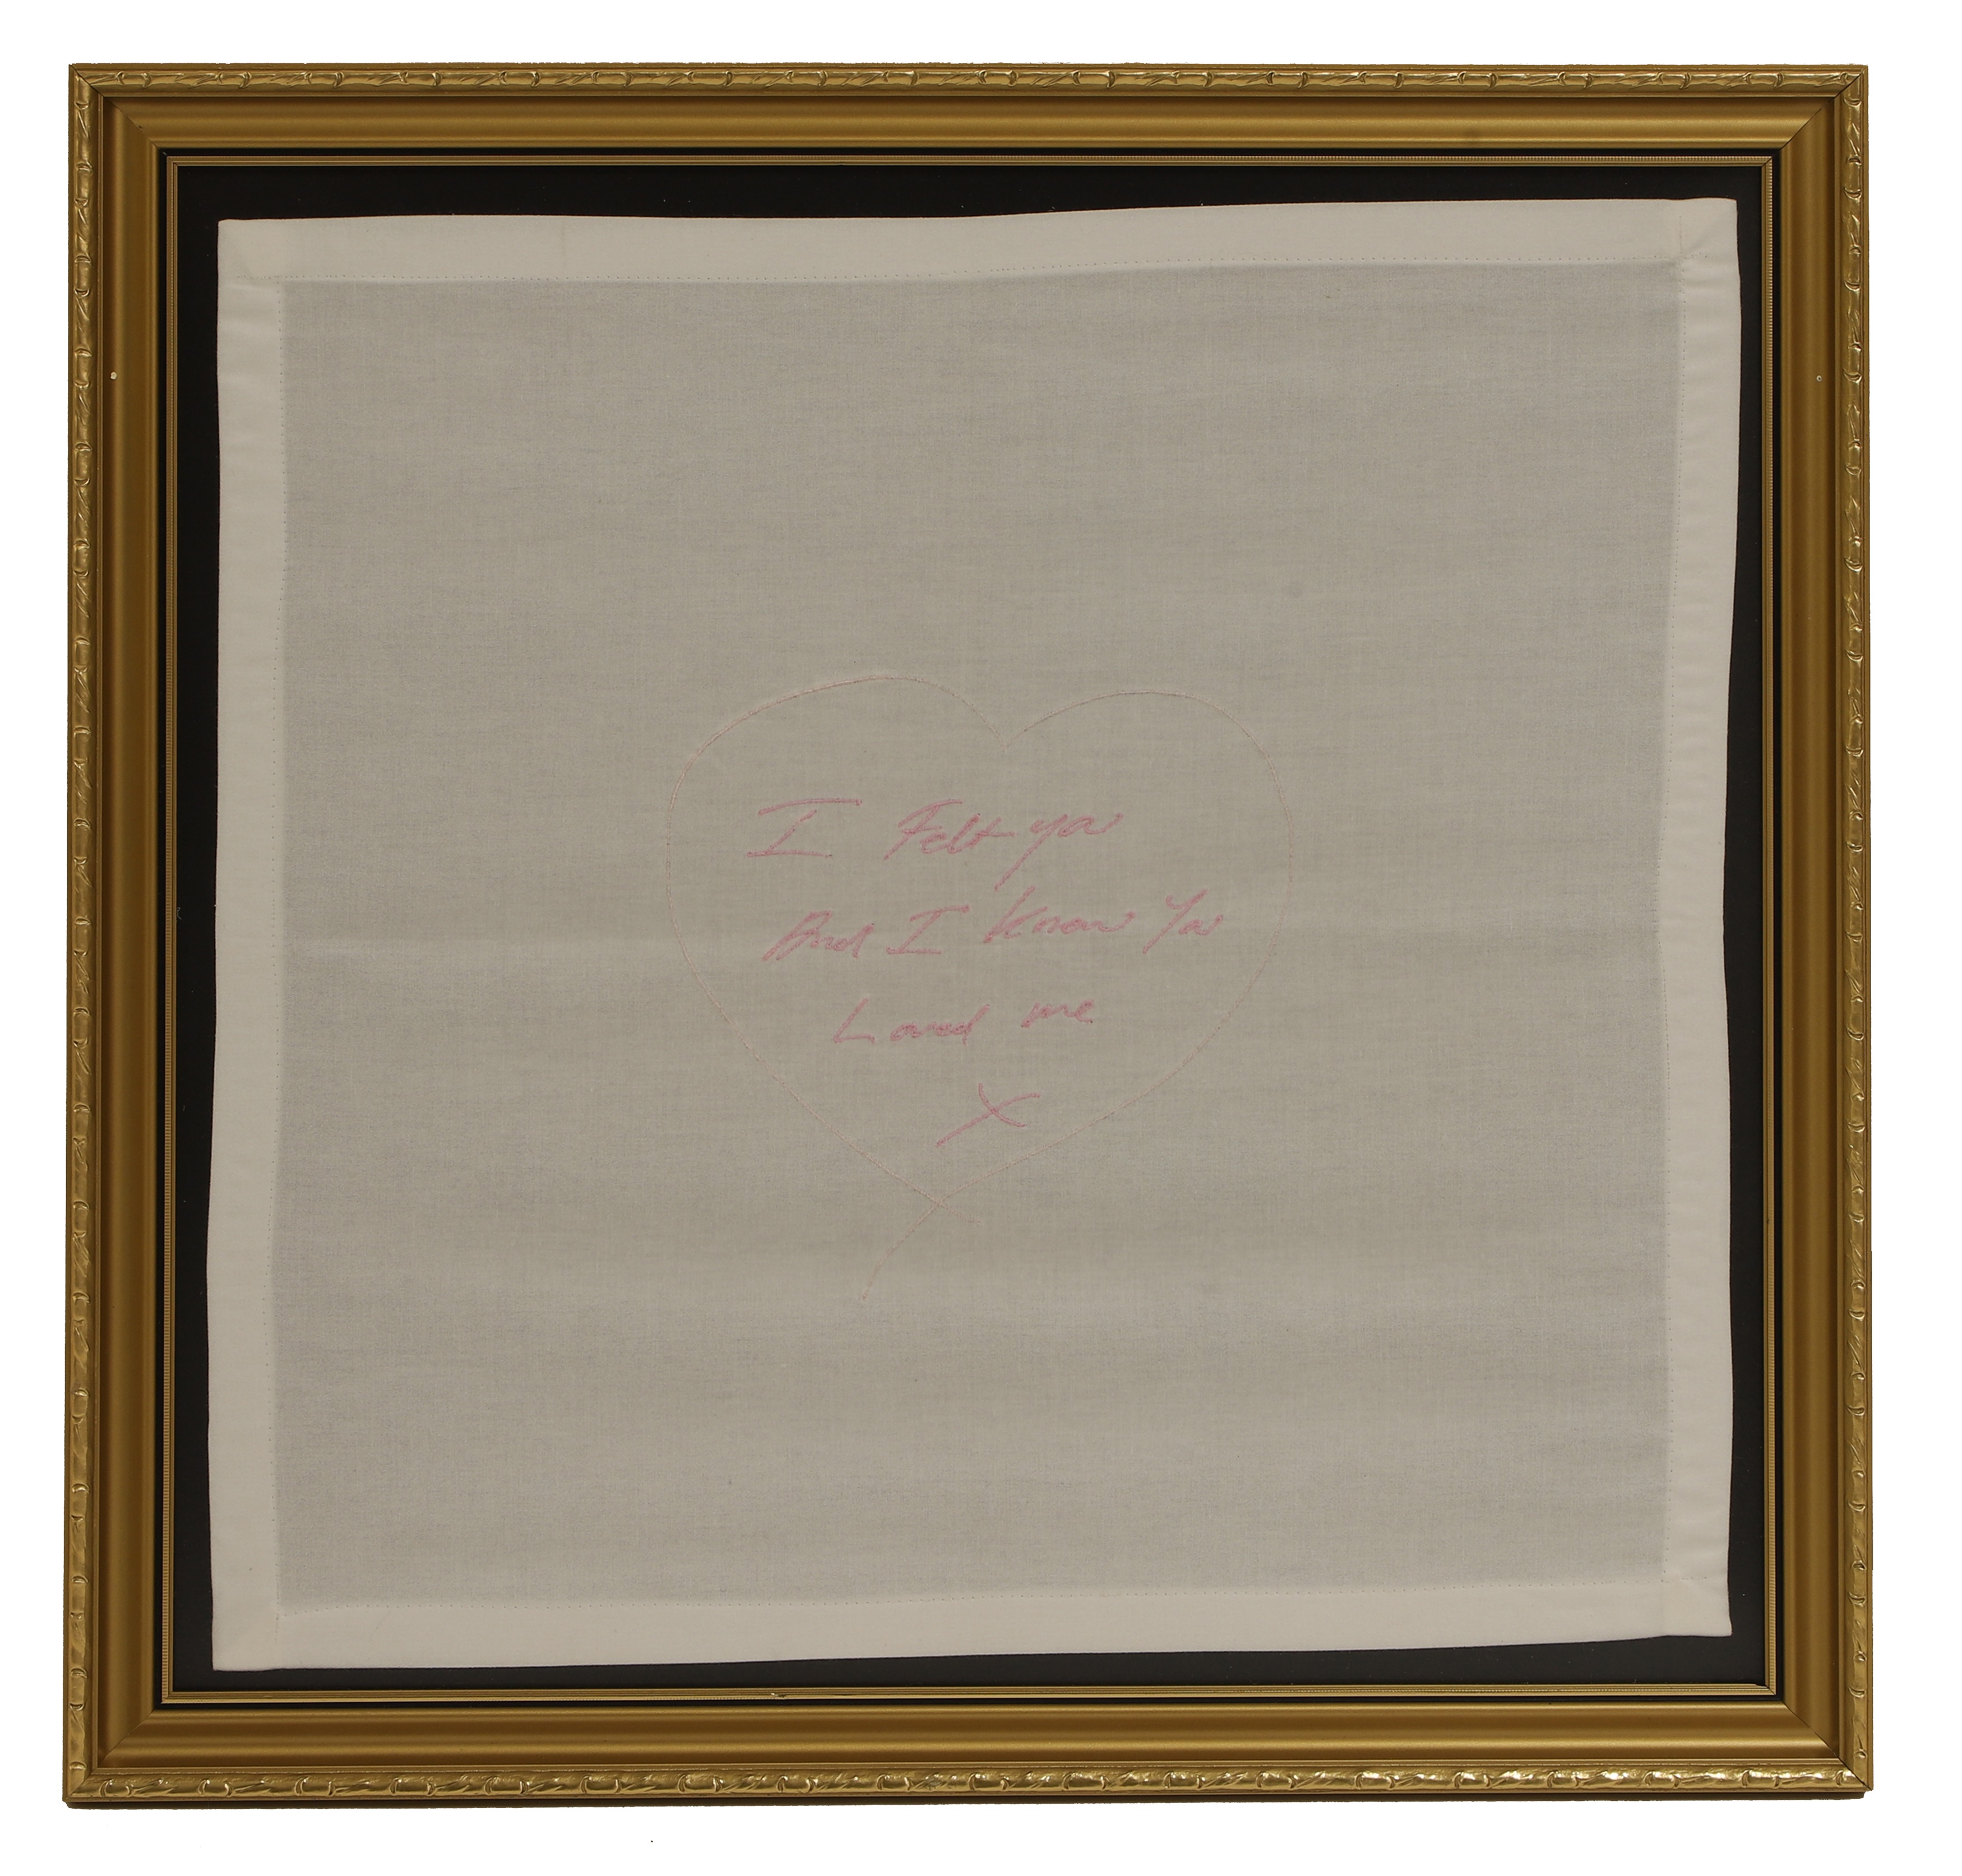 Tracey Emin RA (b.1963) 'I Felt You And I Know You Loved Me' embroidery on linen napkin with swing tag signed, inscribed and dated 'With you in mind/Tracey Emin/2012', and Emin International sticker 46 x 47cm (£600-800)